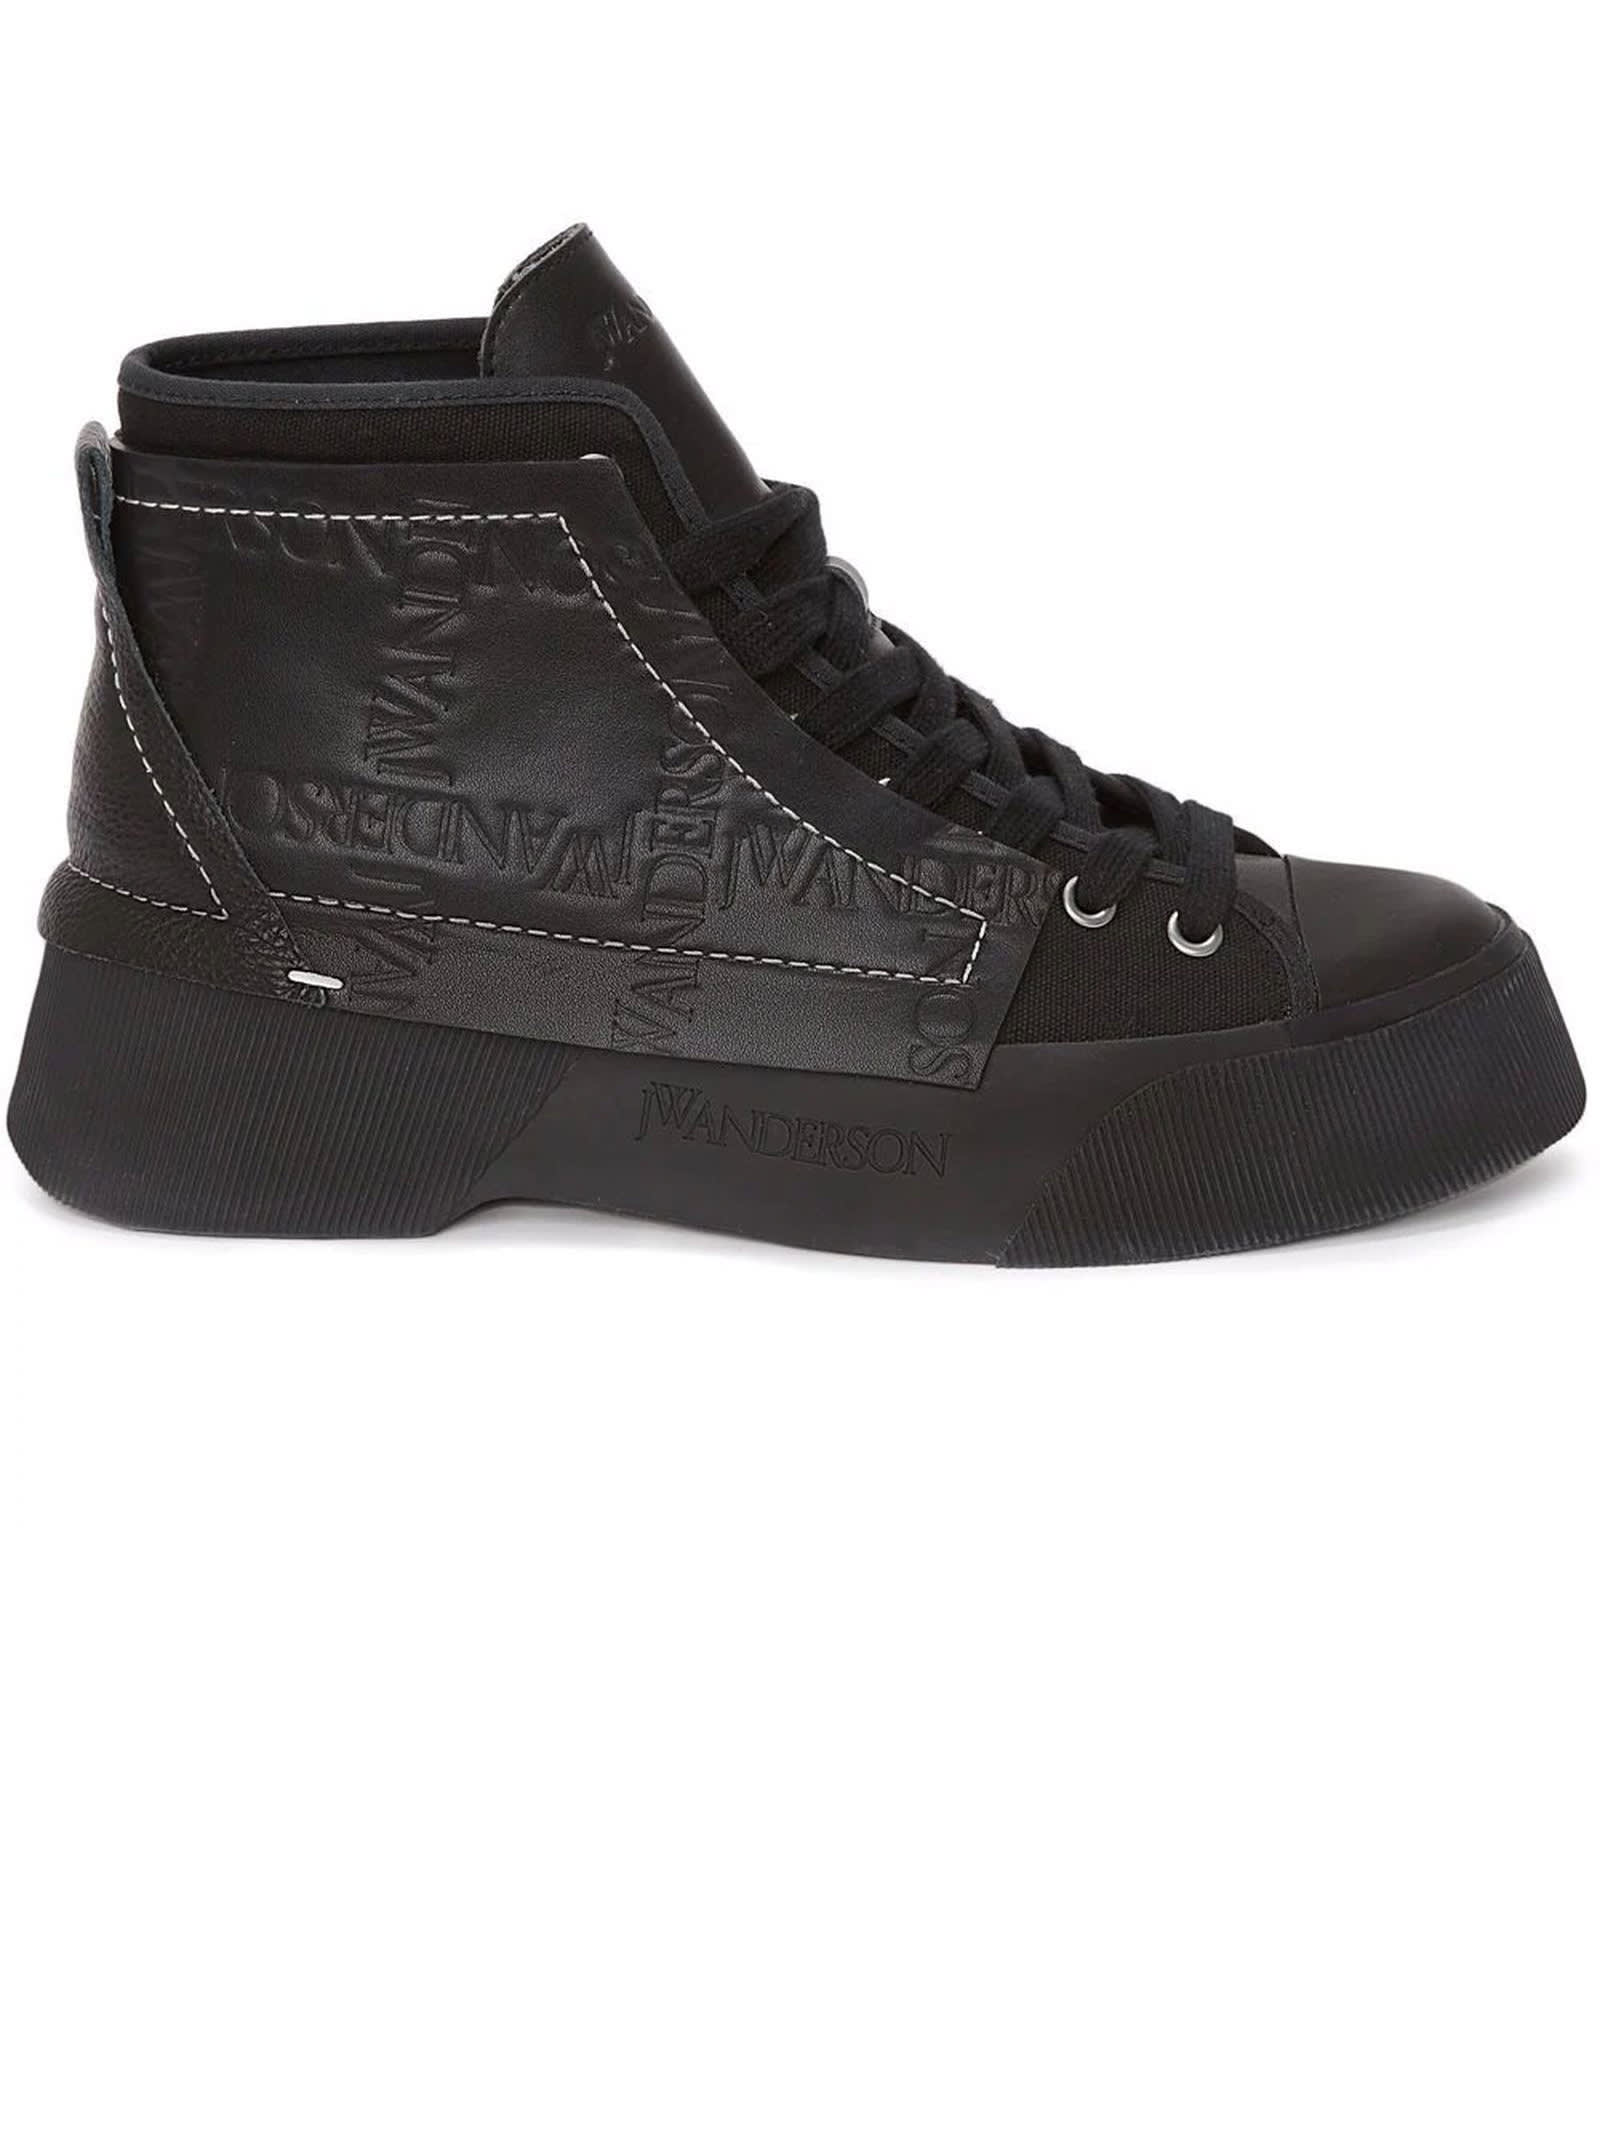 J.W. Anderson Sneakers In Black Leather And Canvas